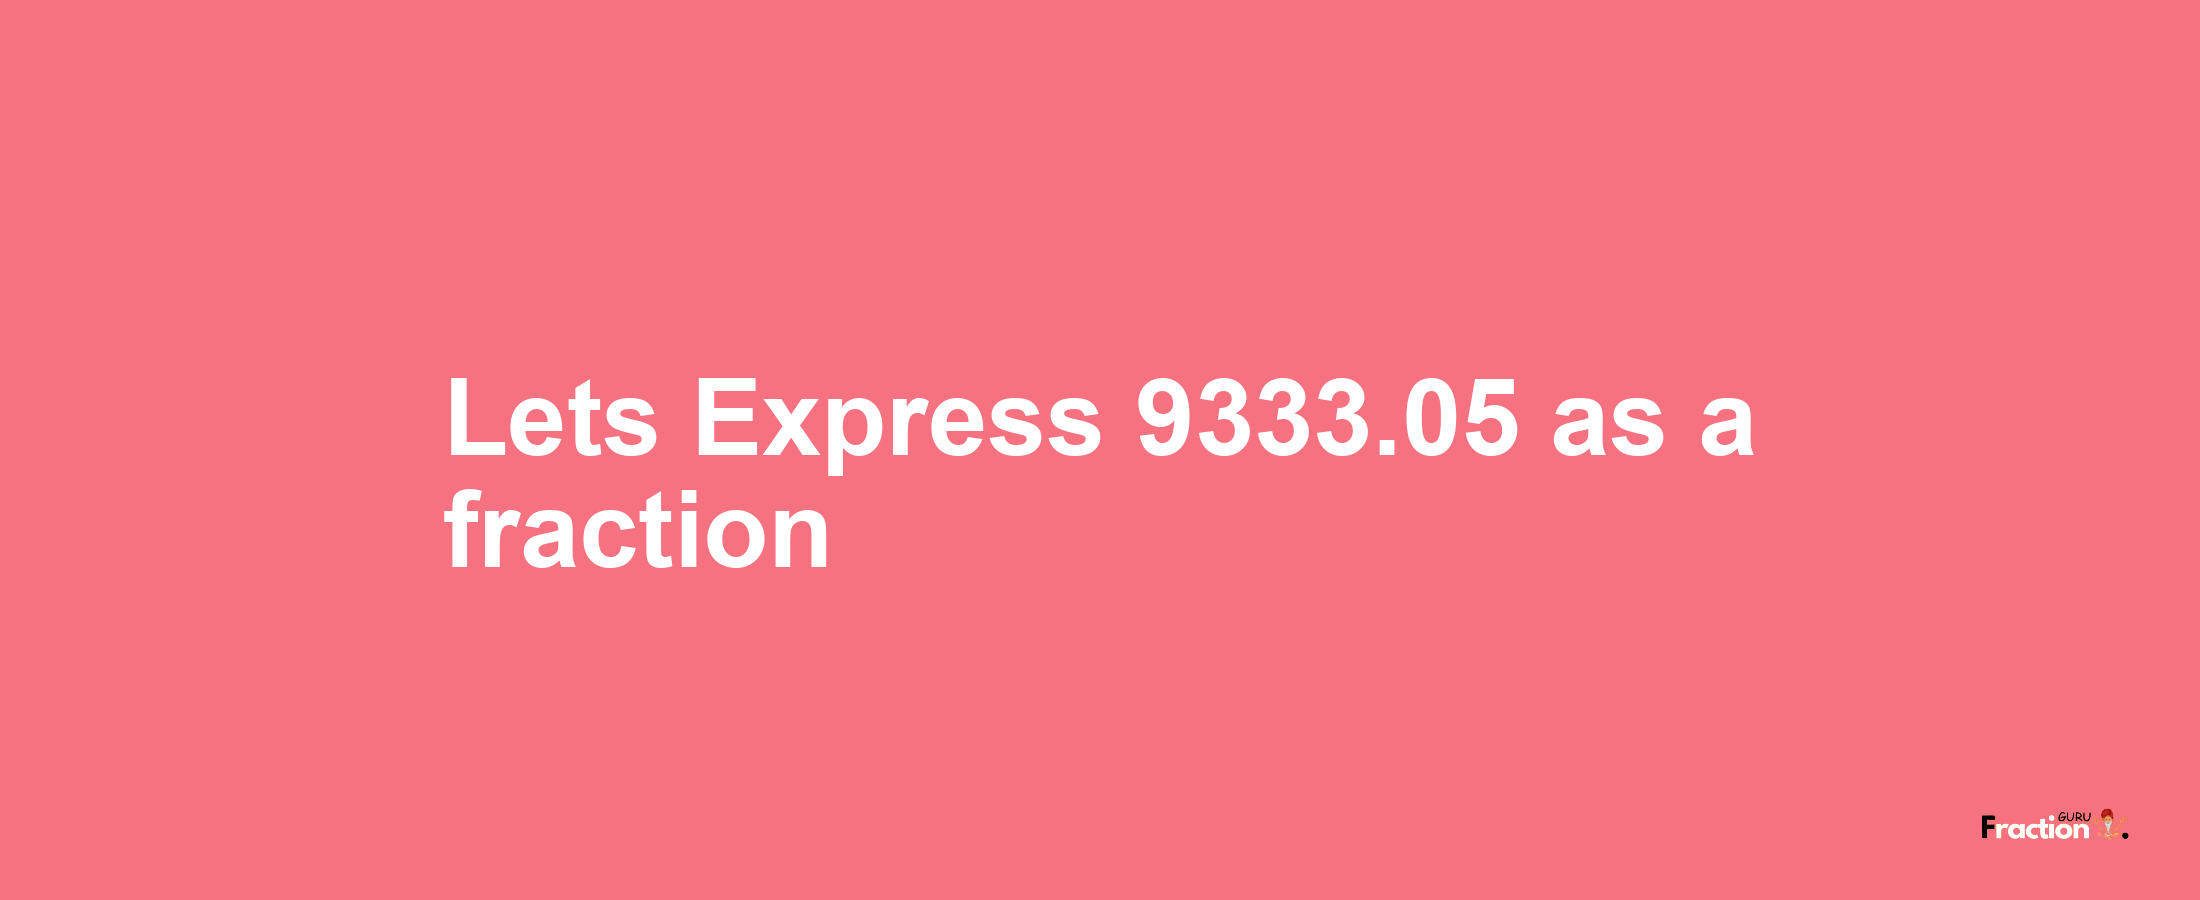 Lets Express 9333.05 as afraction